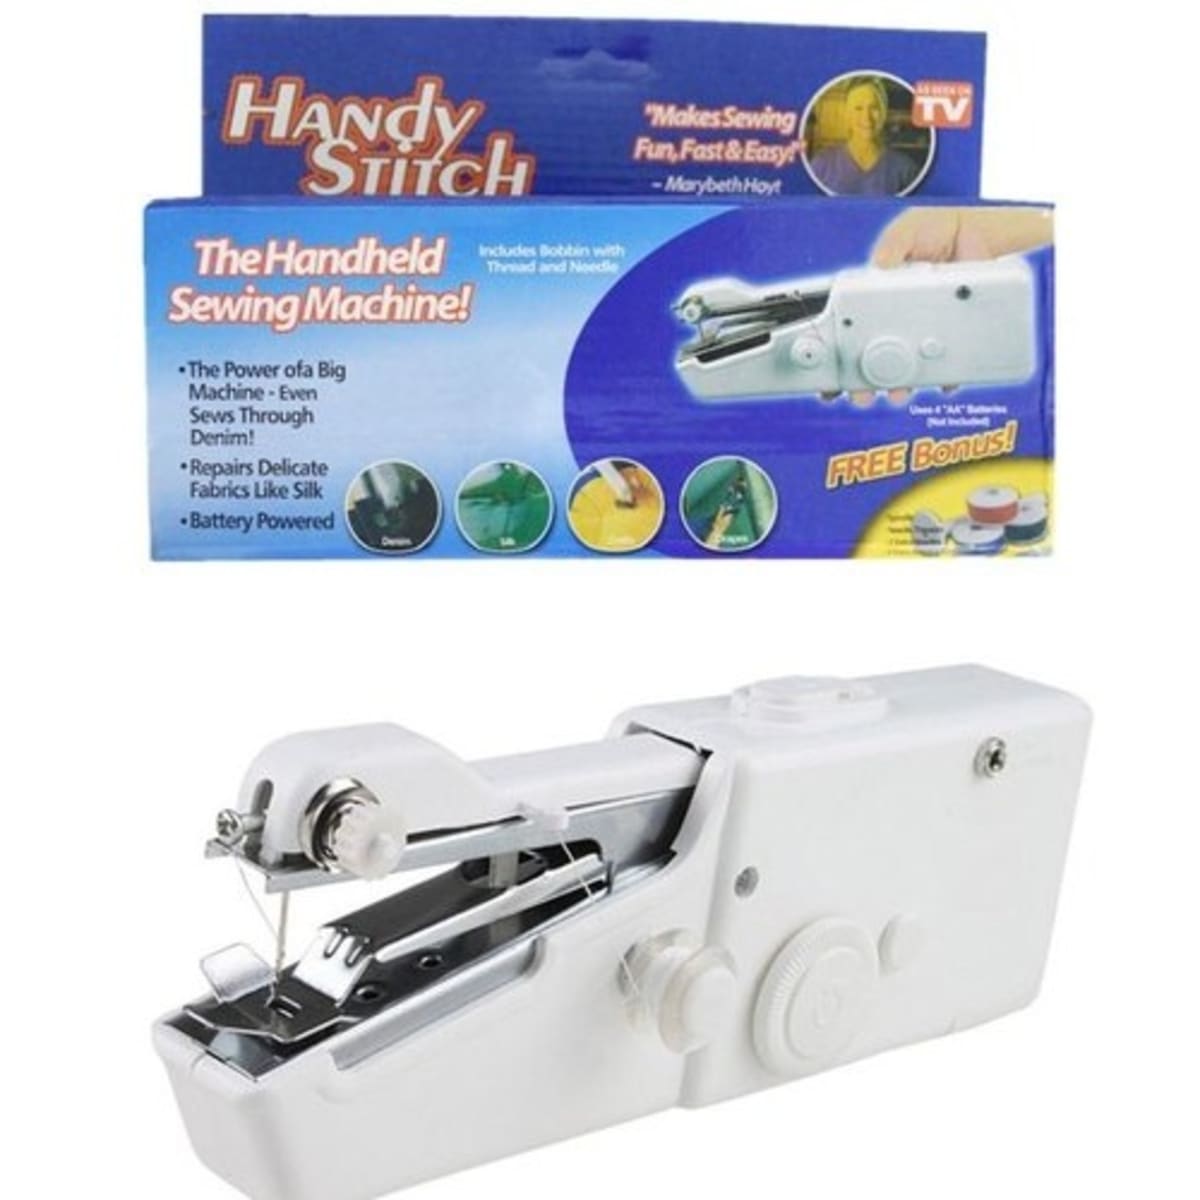 As Seen on TV Portable Hand Held Sewing Machine Quick Stitching Household Cordless Repairs - White